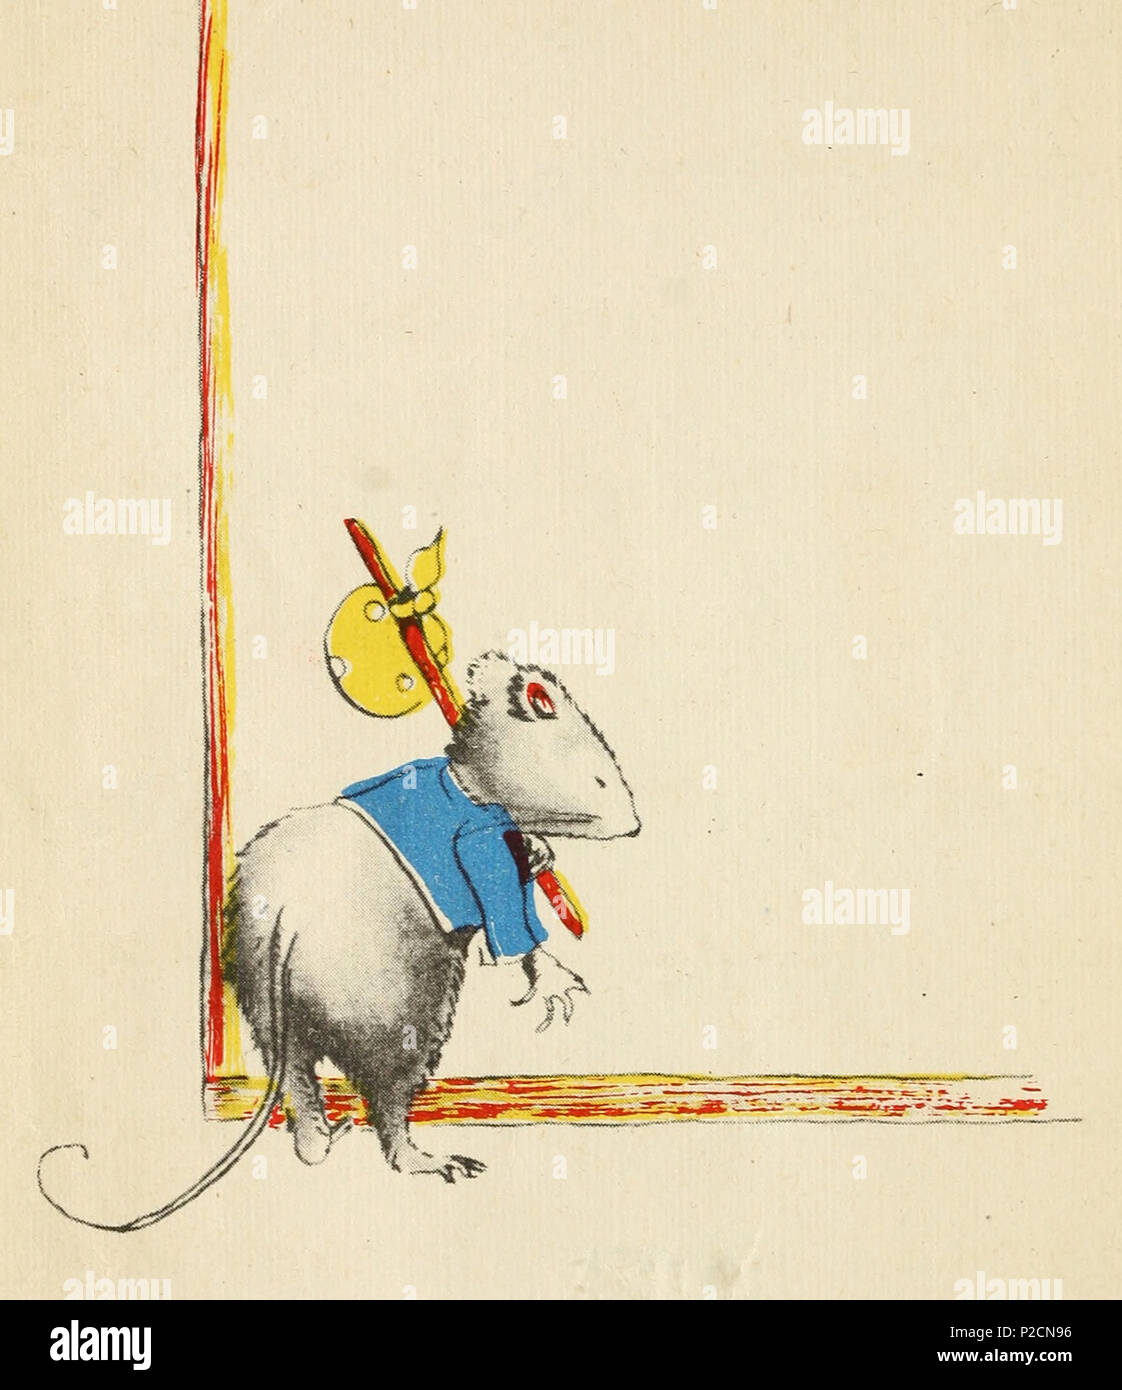 . English: The title character steps into a cellar that he believes will be his home, in The Story of a Little Gray Mouse by author and illustrator Dorothy Sherrill. (Number in parentheses refers to the DjVu location.) . 4 March 2013, 00:41:09.   Dorothy Sherrill  (1901–1990)     Description American author and illustrator  Date of birth/death 5 May 1901 28 February 1990  Location of birth/death Boston, Massachusetts Holland, Pennsylvania  Work period 1930s–1960s  Work location New York City  Authority control  : Q18511658 VIAF:?43893146 ISNI:?0000 0000 4112 7308 LCCN:?no96035015 NDL:?00925023 Stock Photo